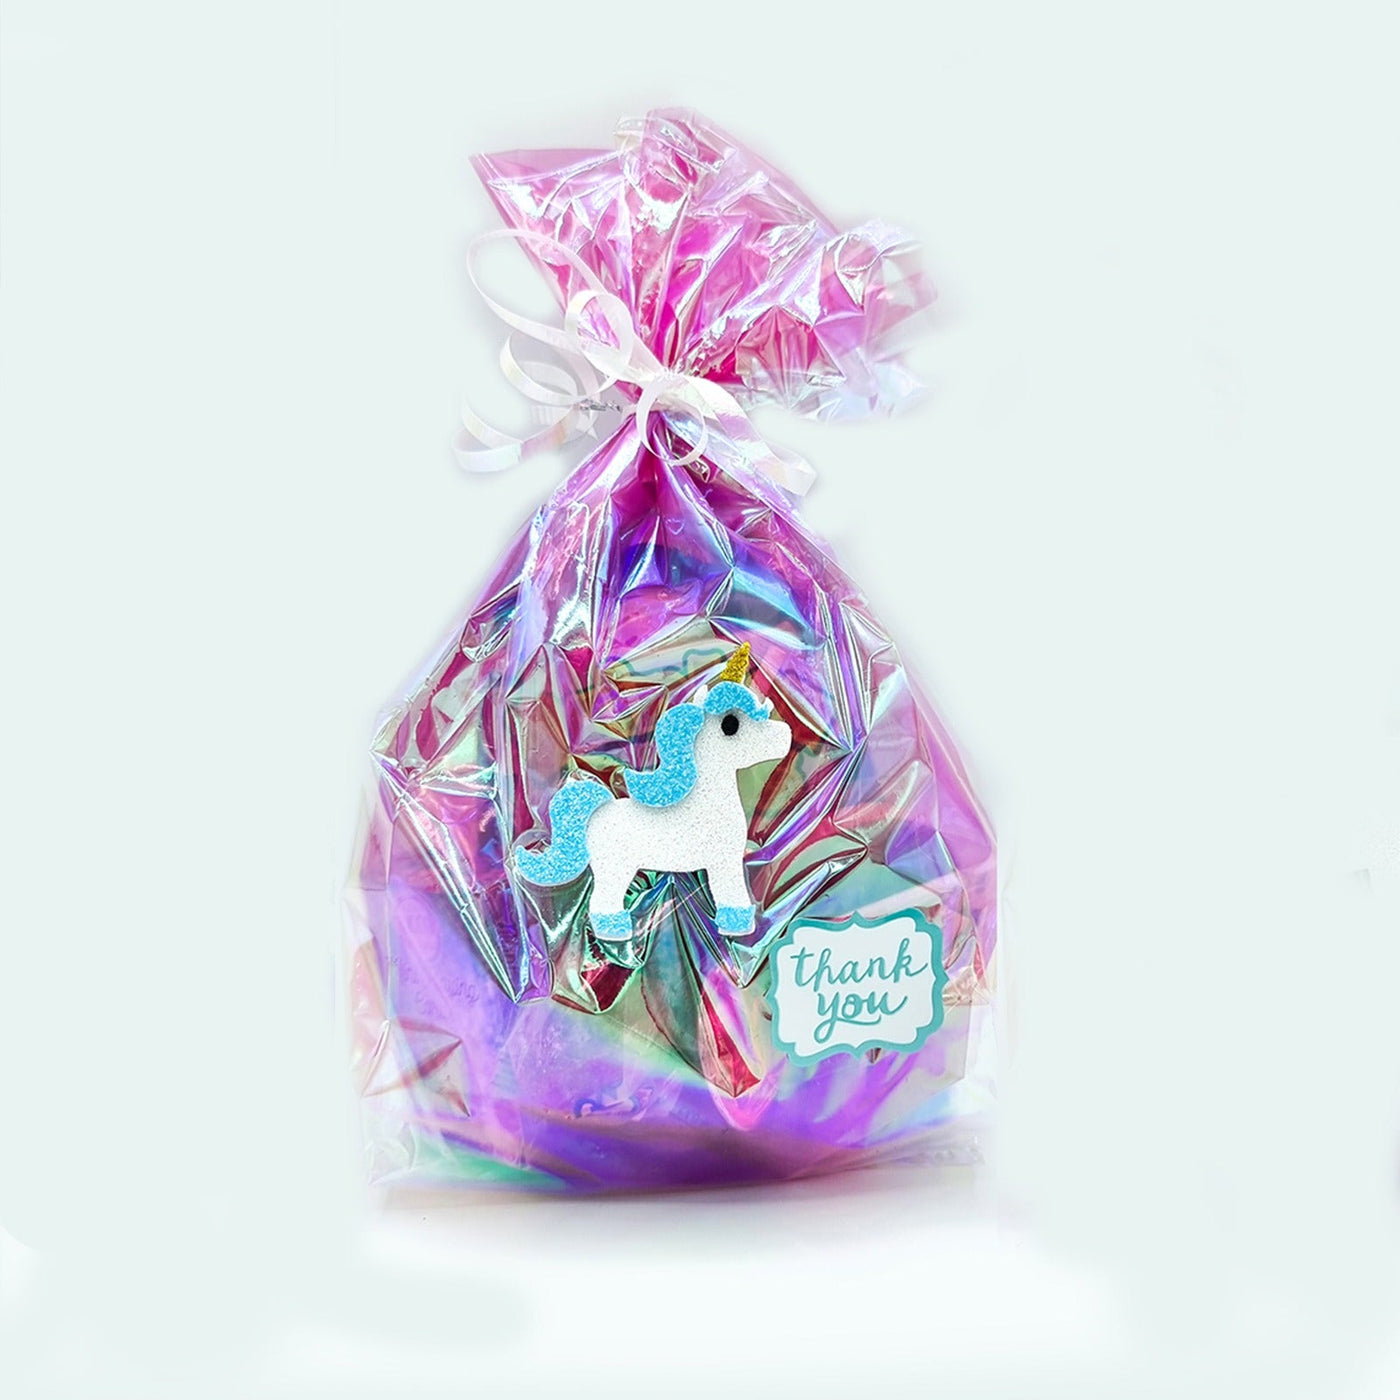 Girls Pre Filled Unicorn Party Favours With Toys And Sweets.